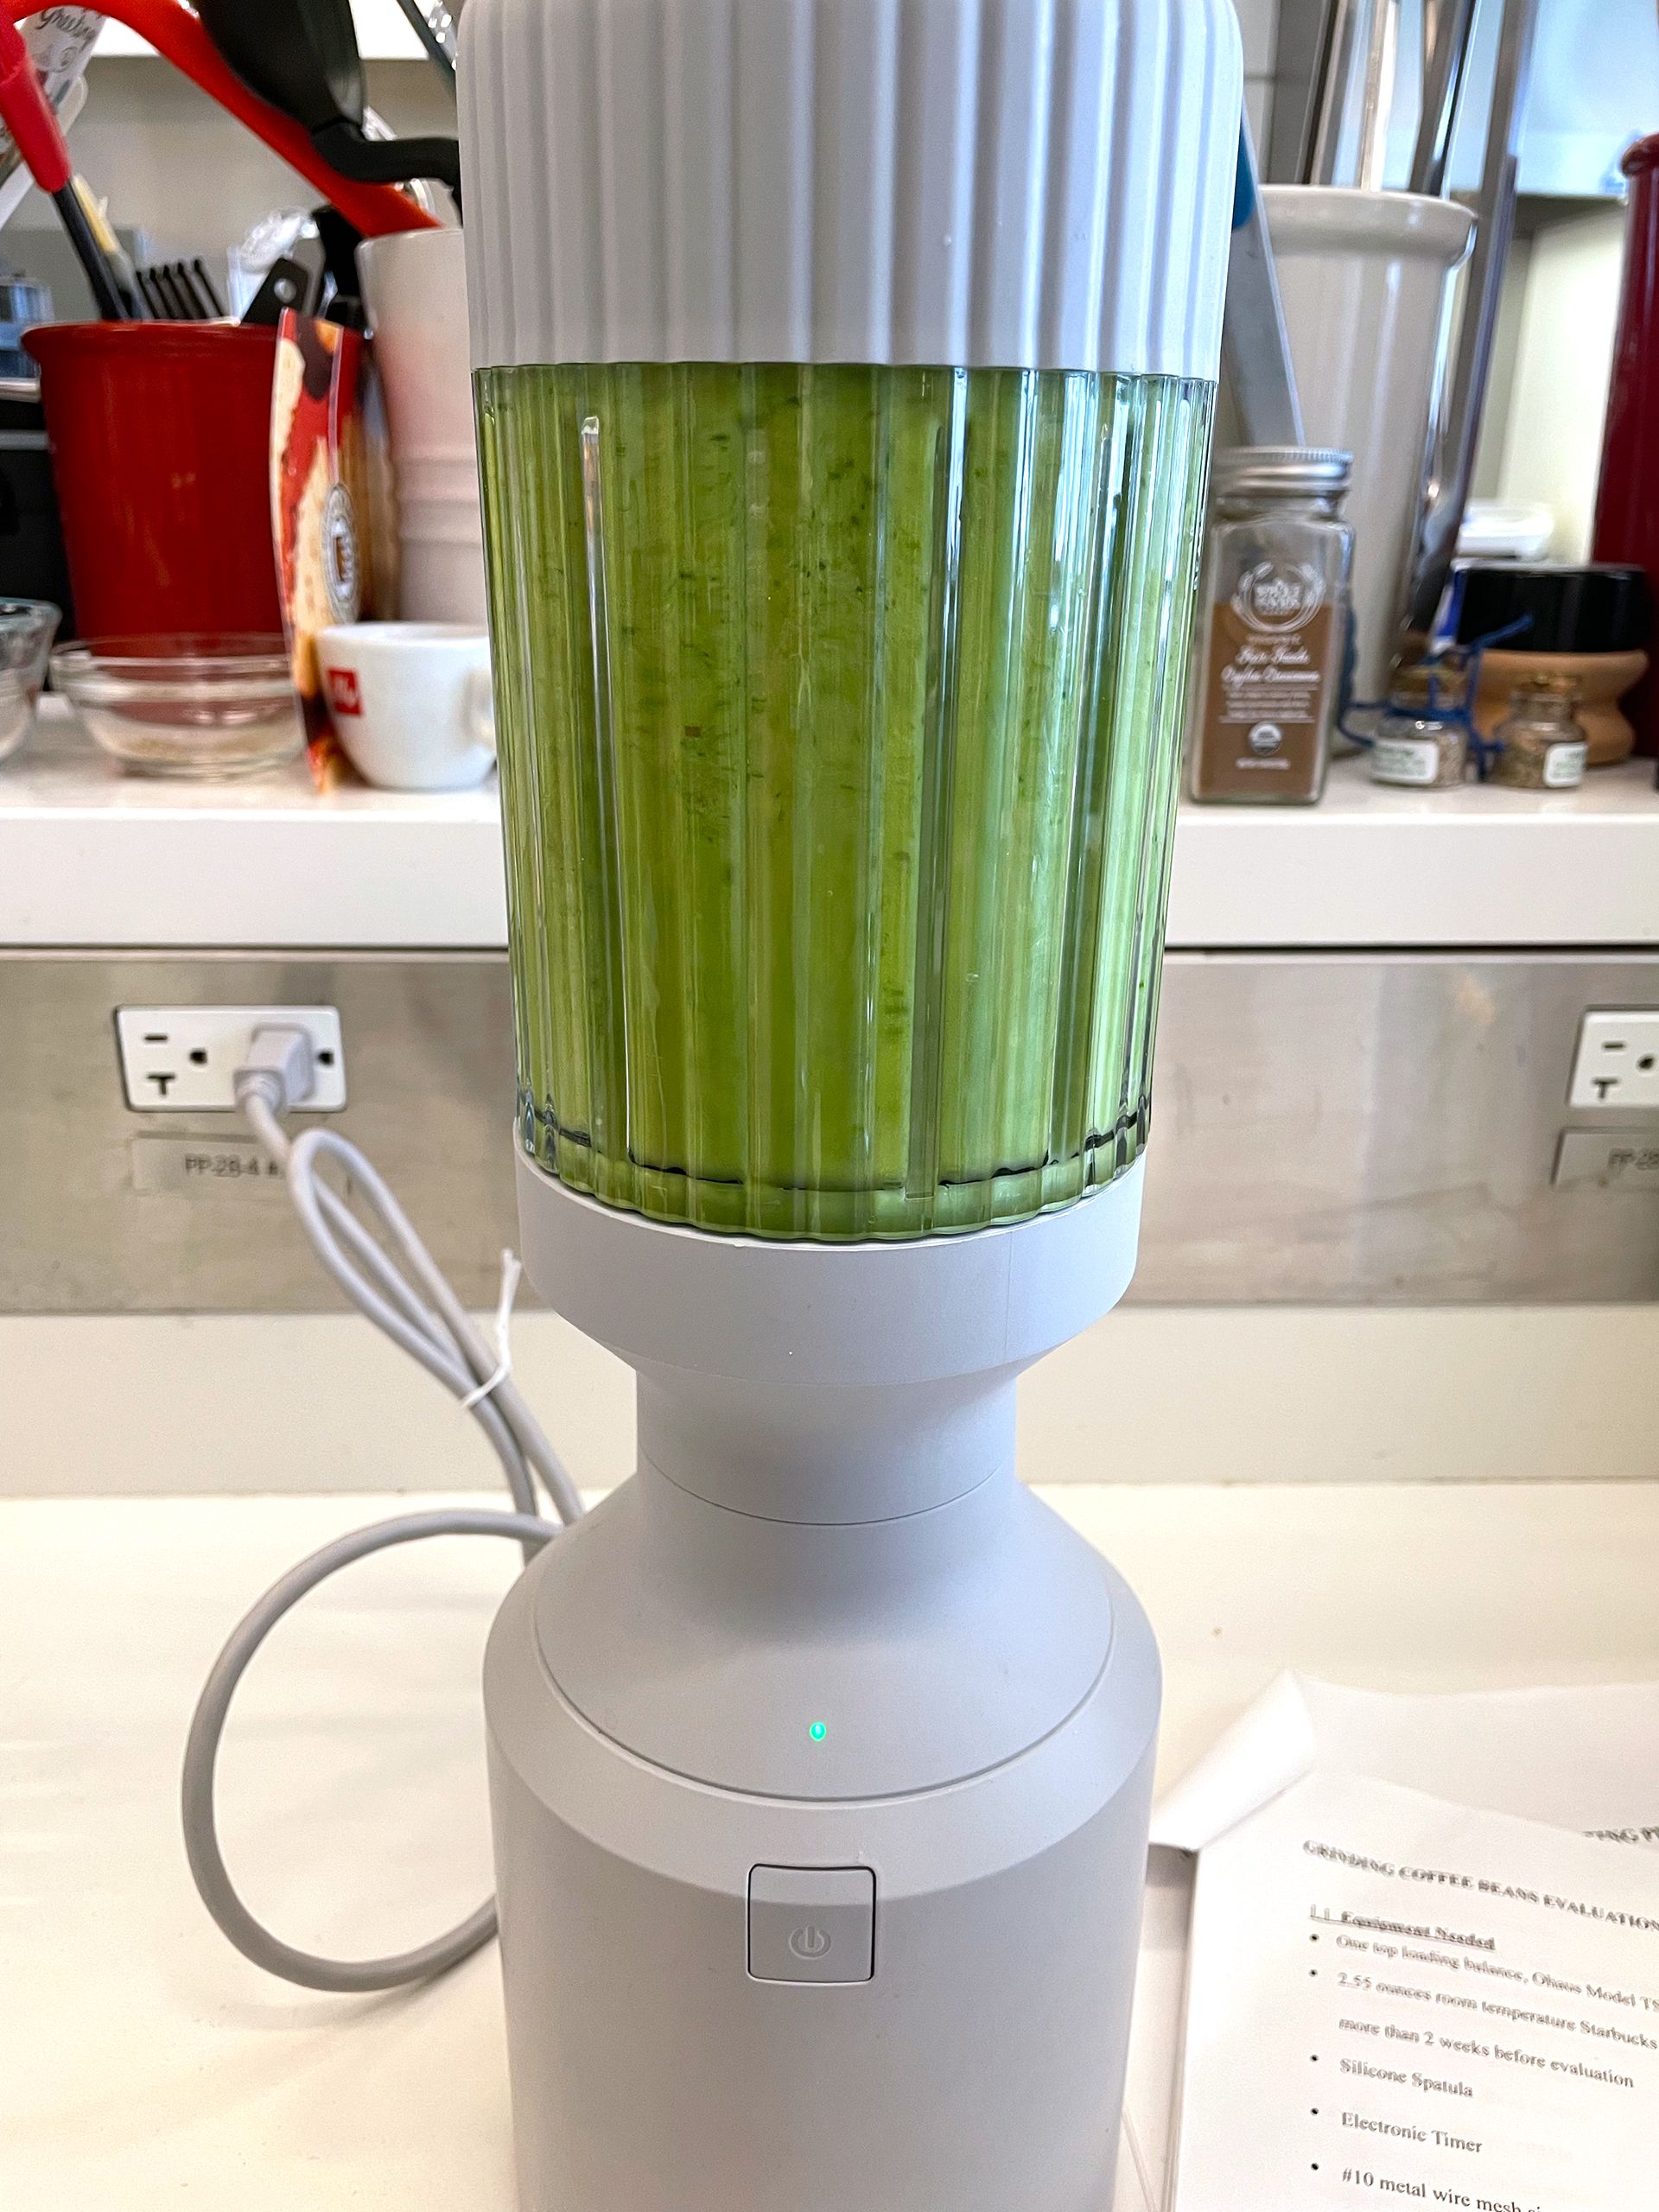 Review: I Tried the Beast Blender (and Now I'm a Smoothie Master)